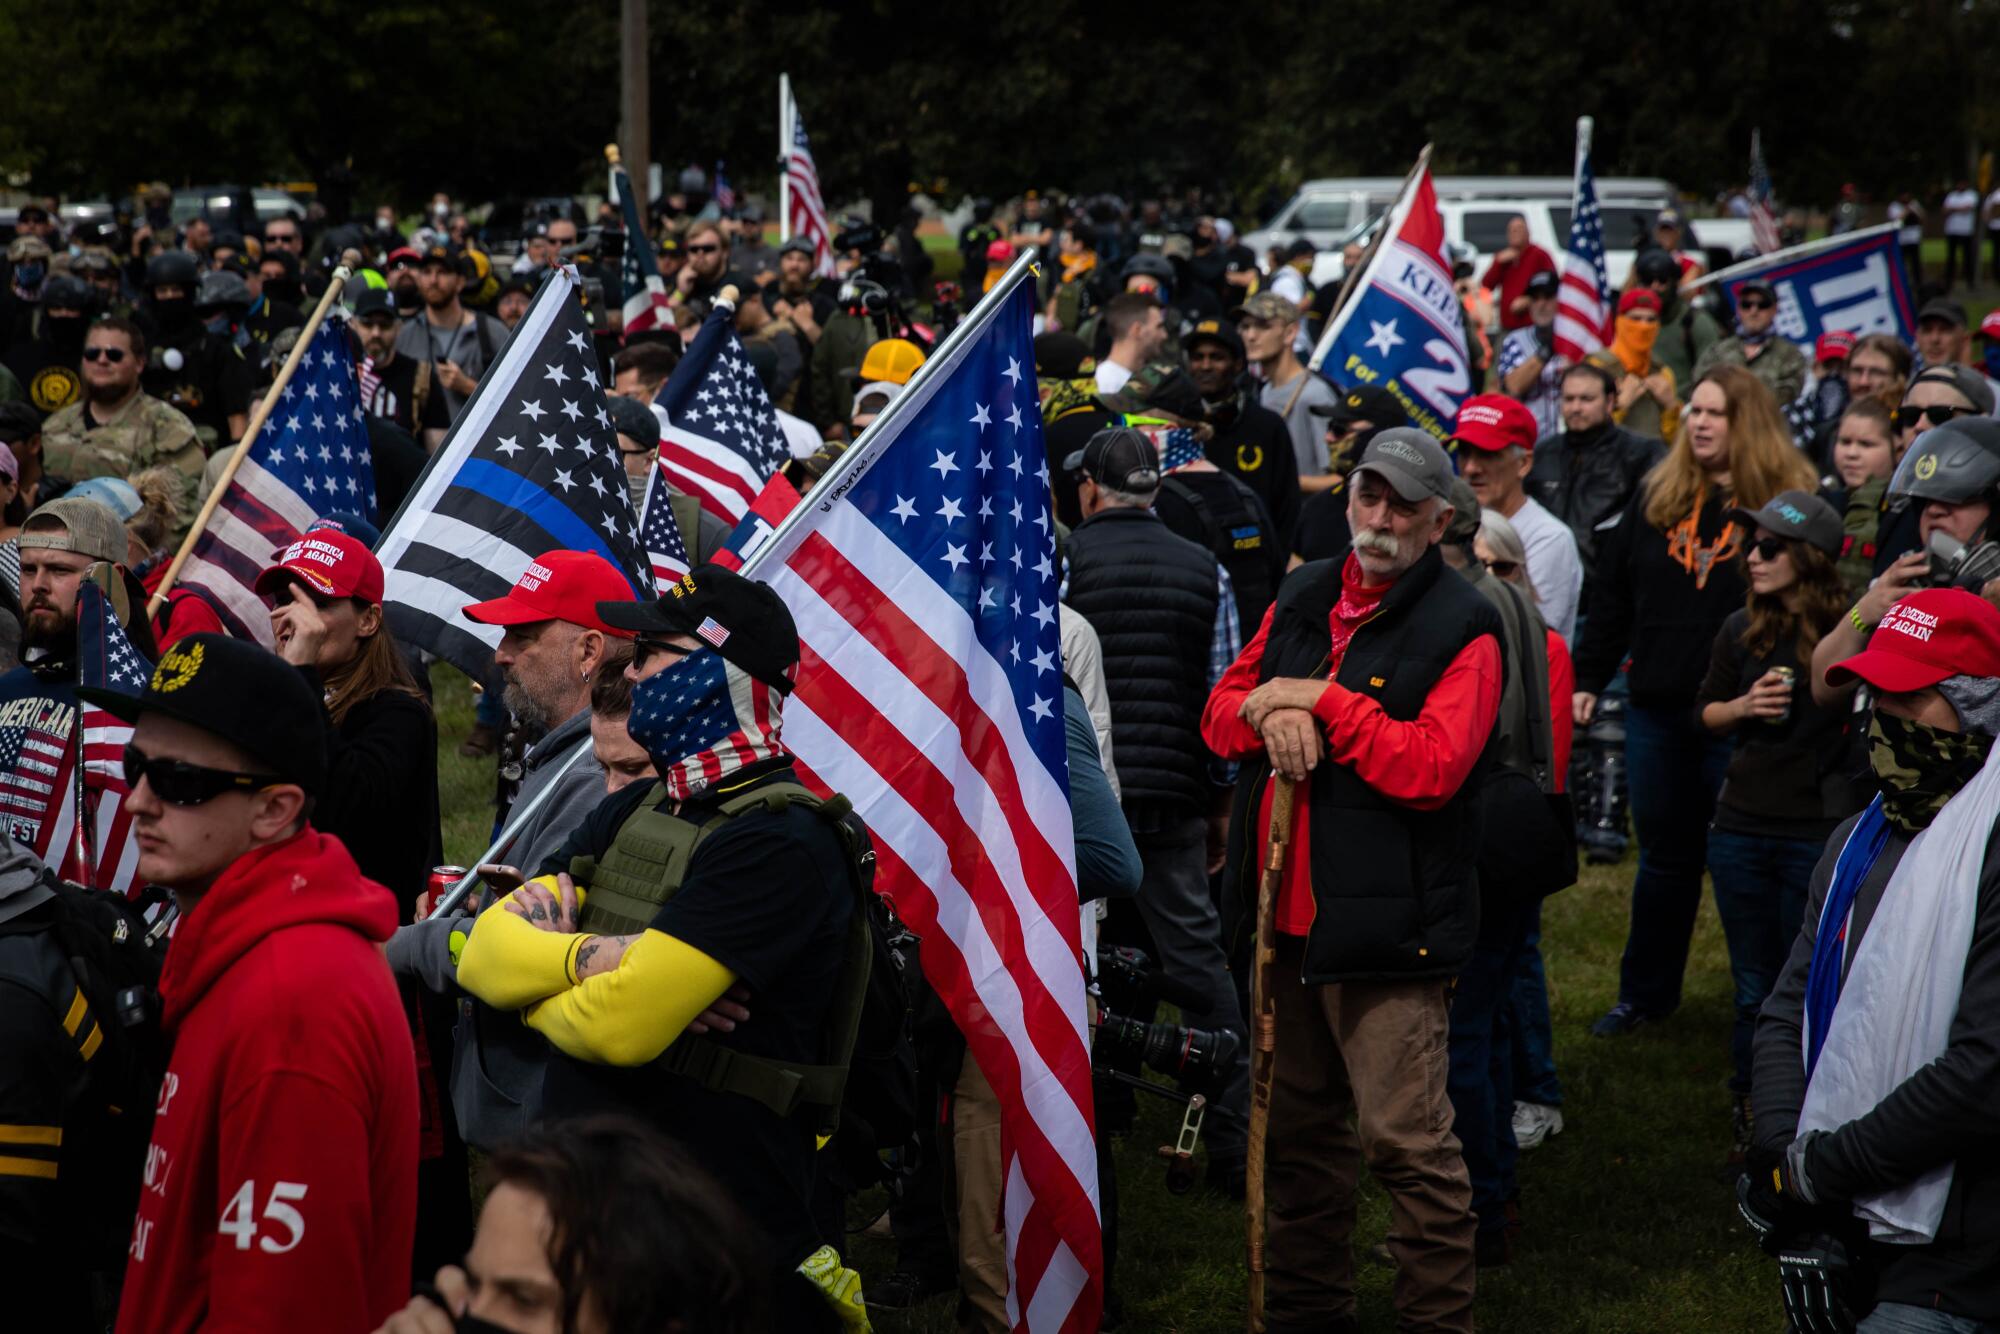 Several hundred members of the Proud Boys with U.S. flags and signs